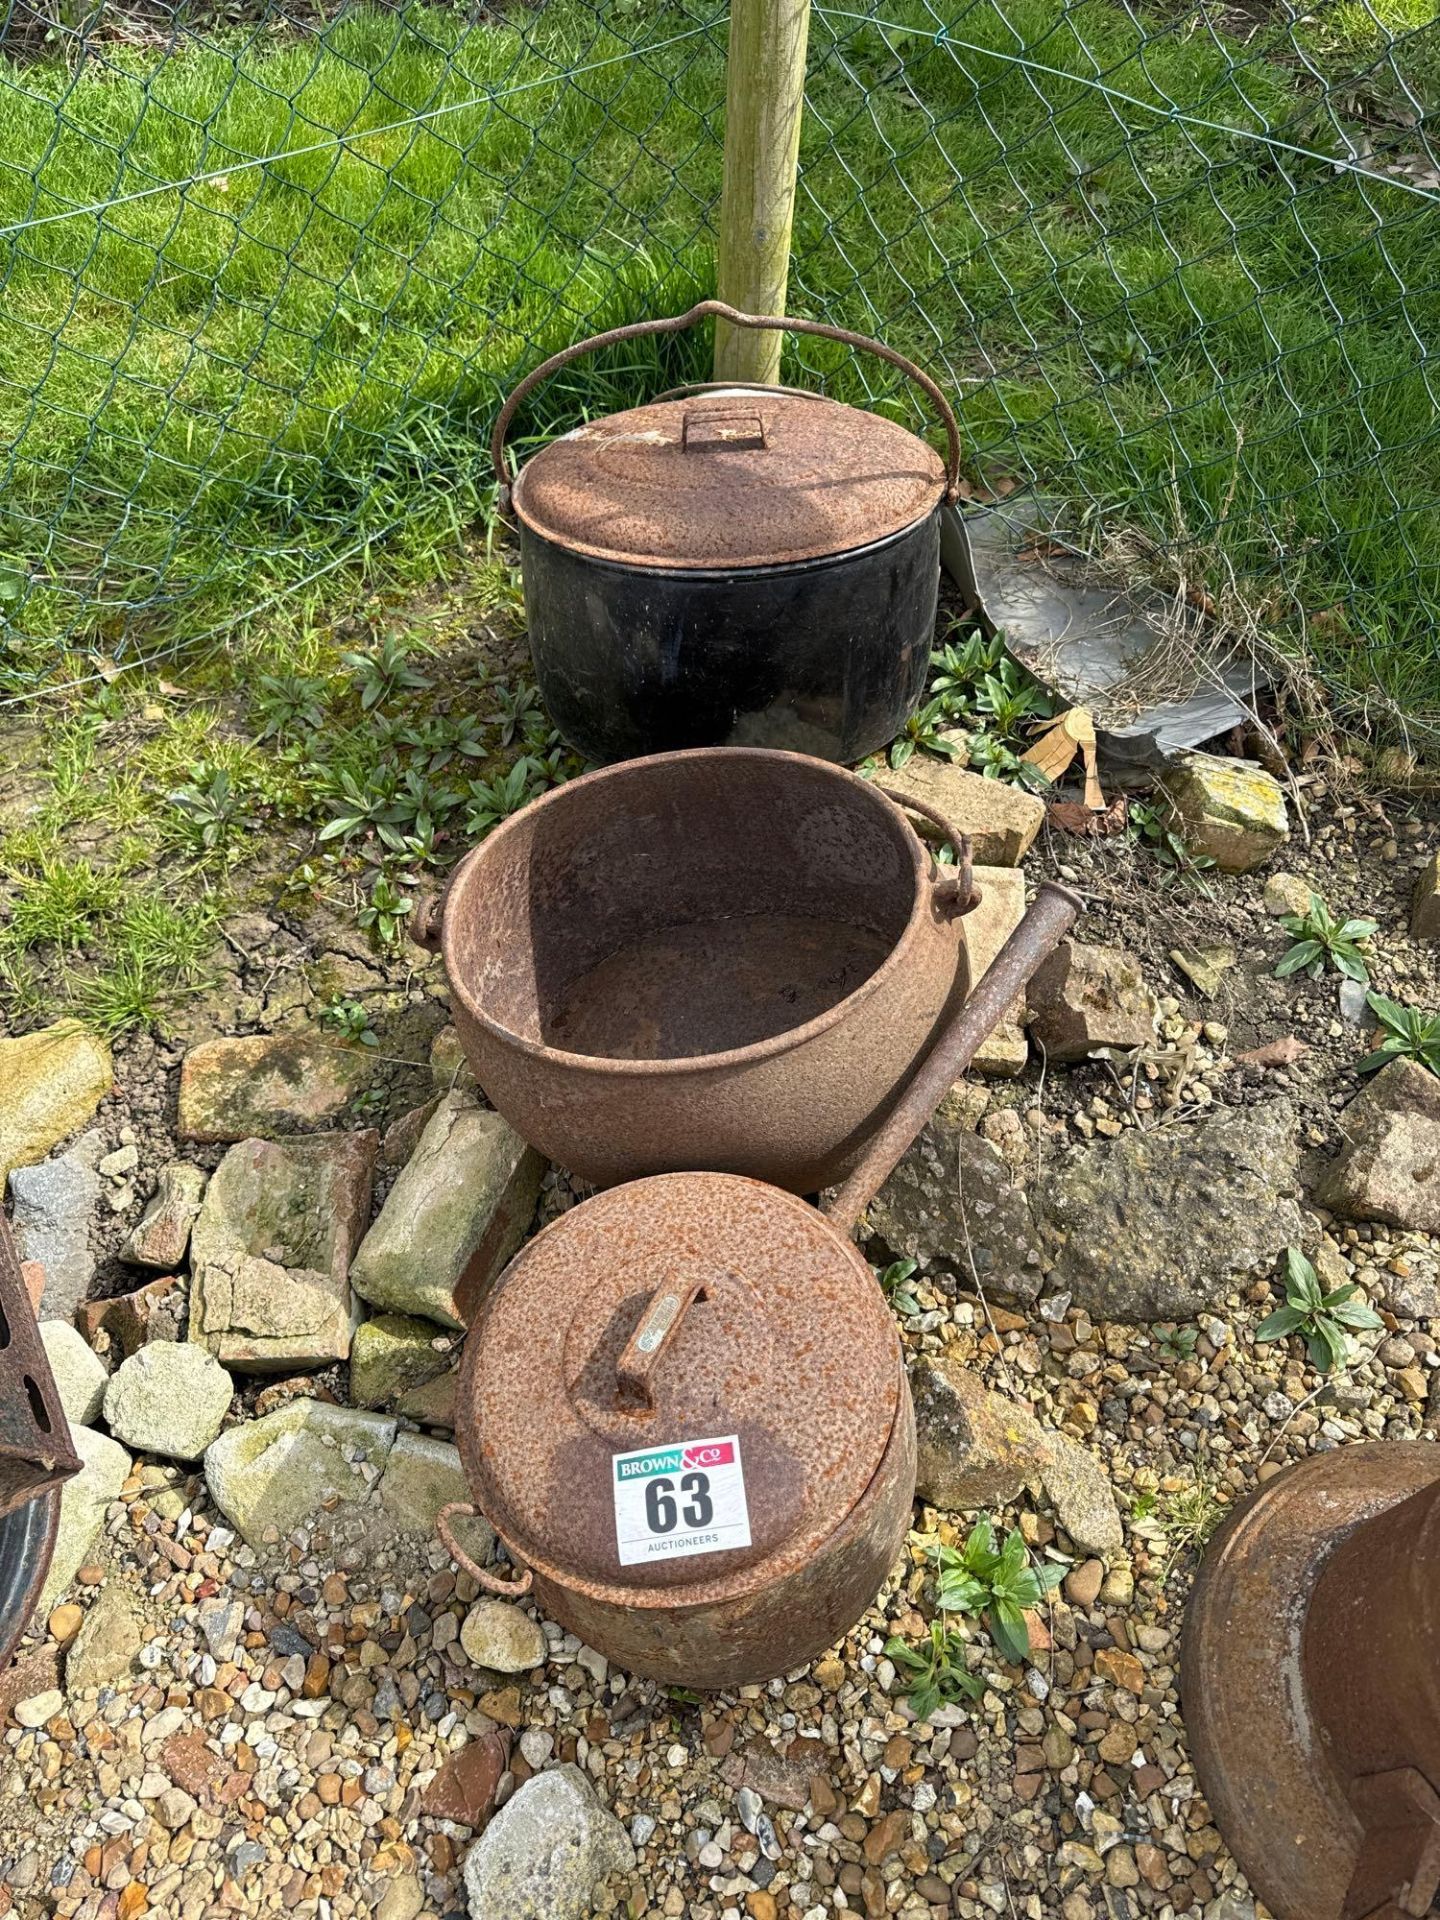 Cast iron pots and kettle